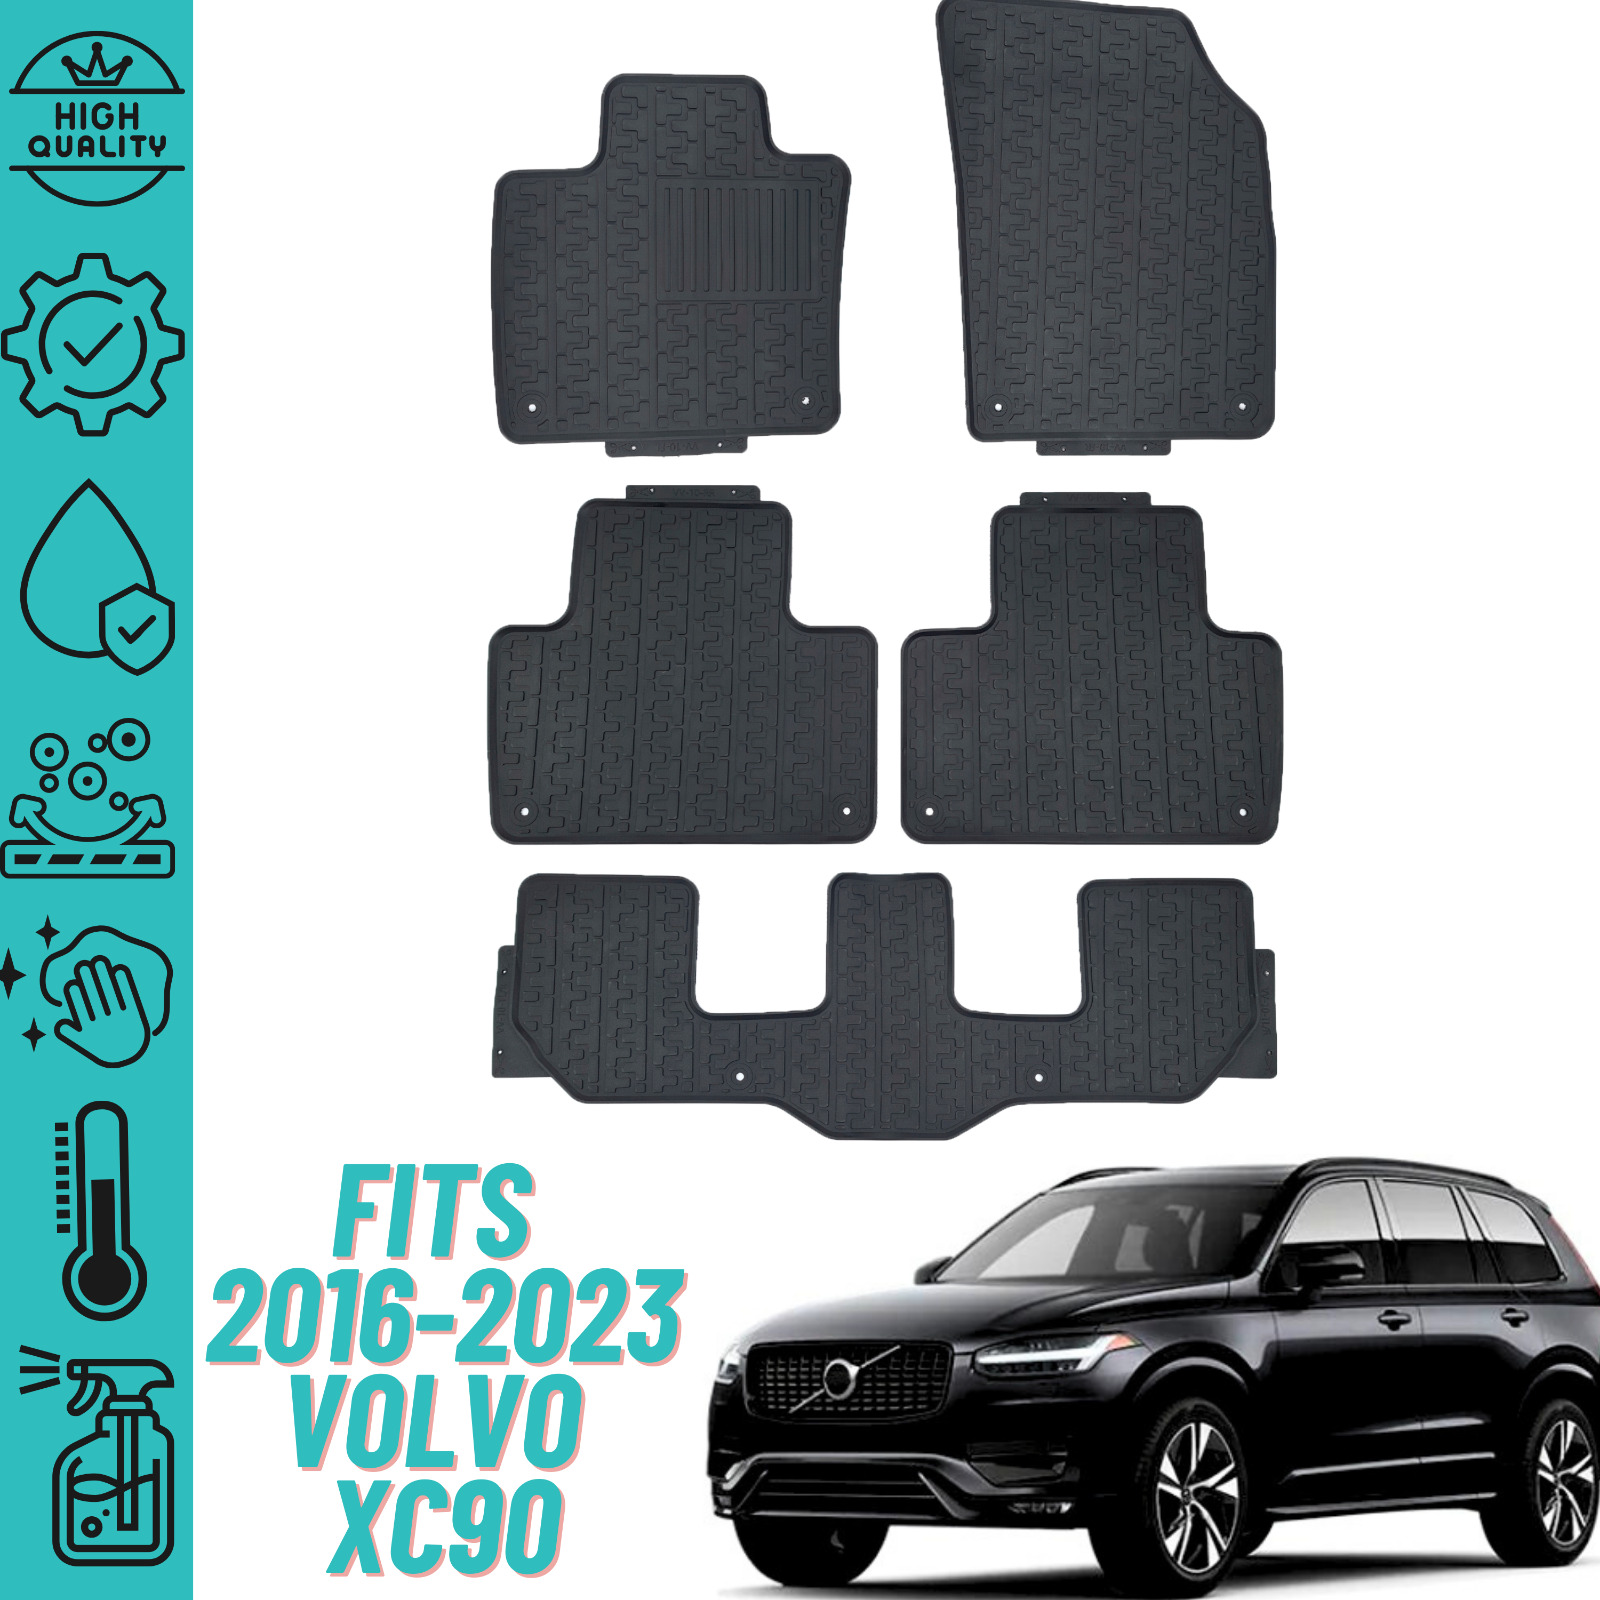 For 2016-2023 Volvo XC90 Floor Mats Heavy Duty All Weather Liner 3Row Set Rubber